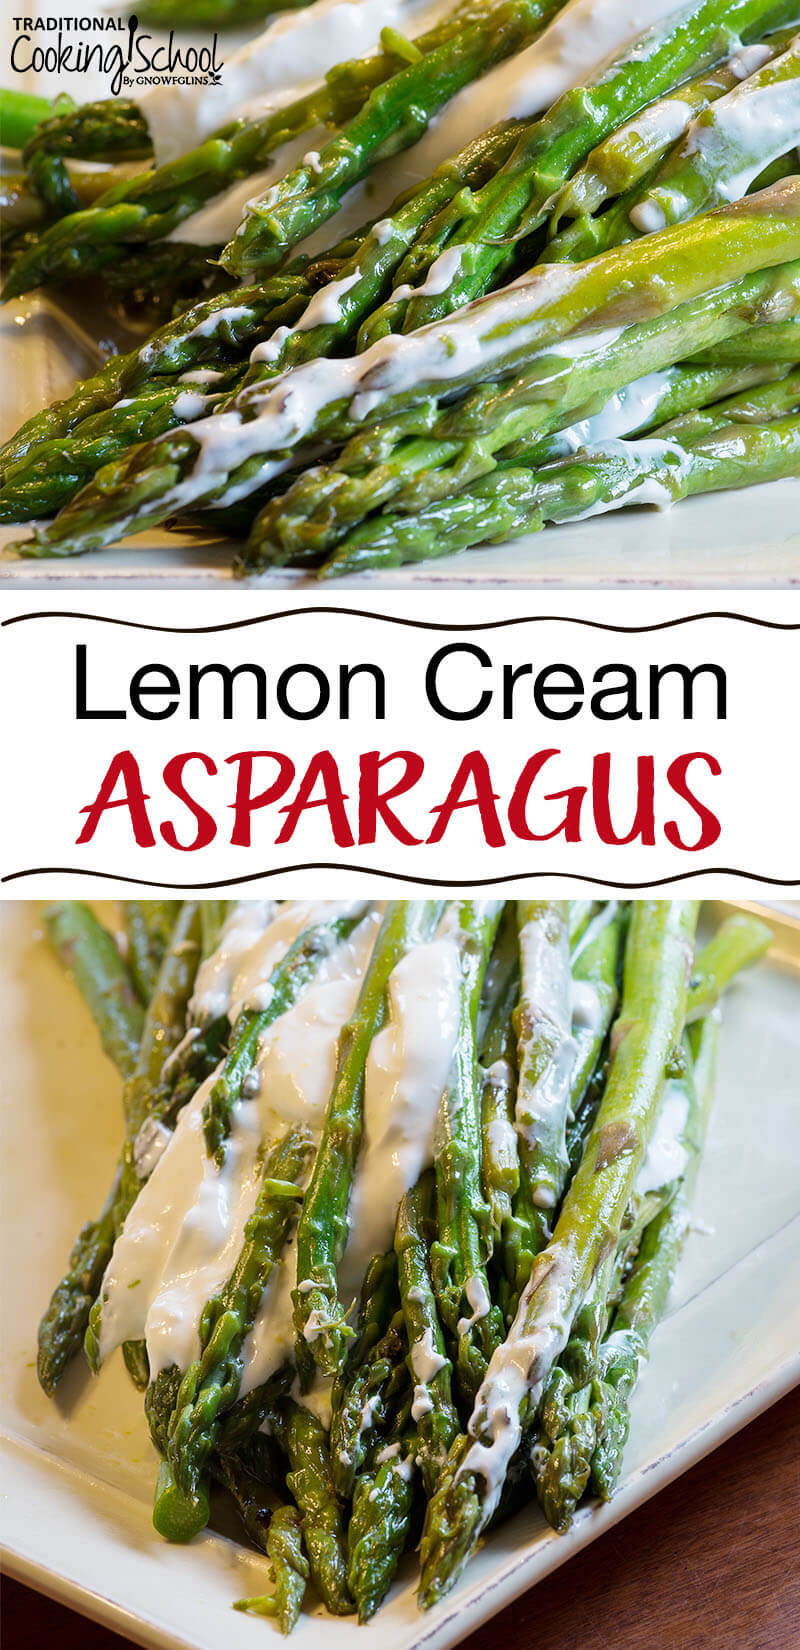 This is a simple recipe for delicious, tender, young asparagus. We love it! Plus we can use up abundant spring cream. :) As I'm sooooo out the door to homeschool testing, I'm going to leave my introduction at that. Take my word for it, you'll love this dish! TraditionalCookingSchool.com